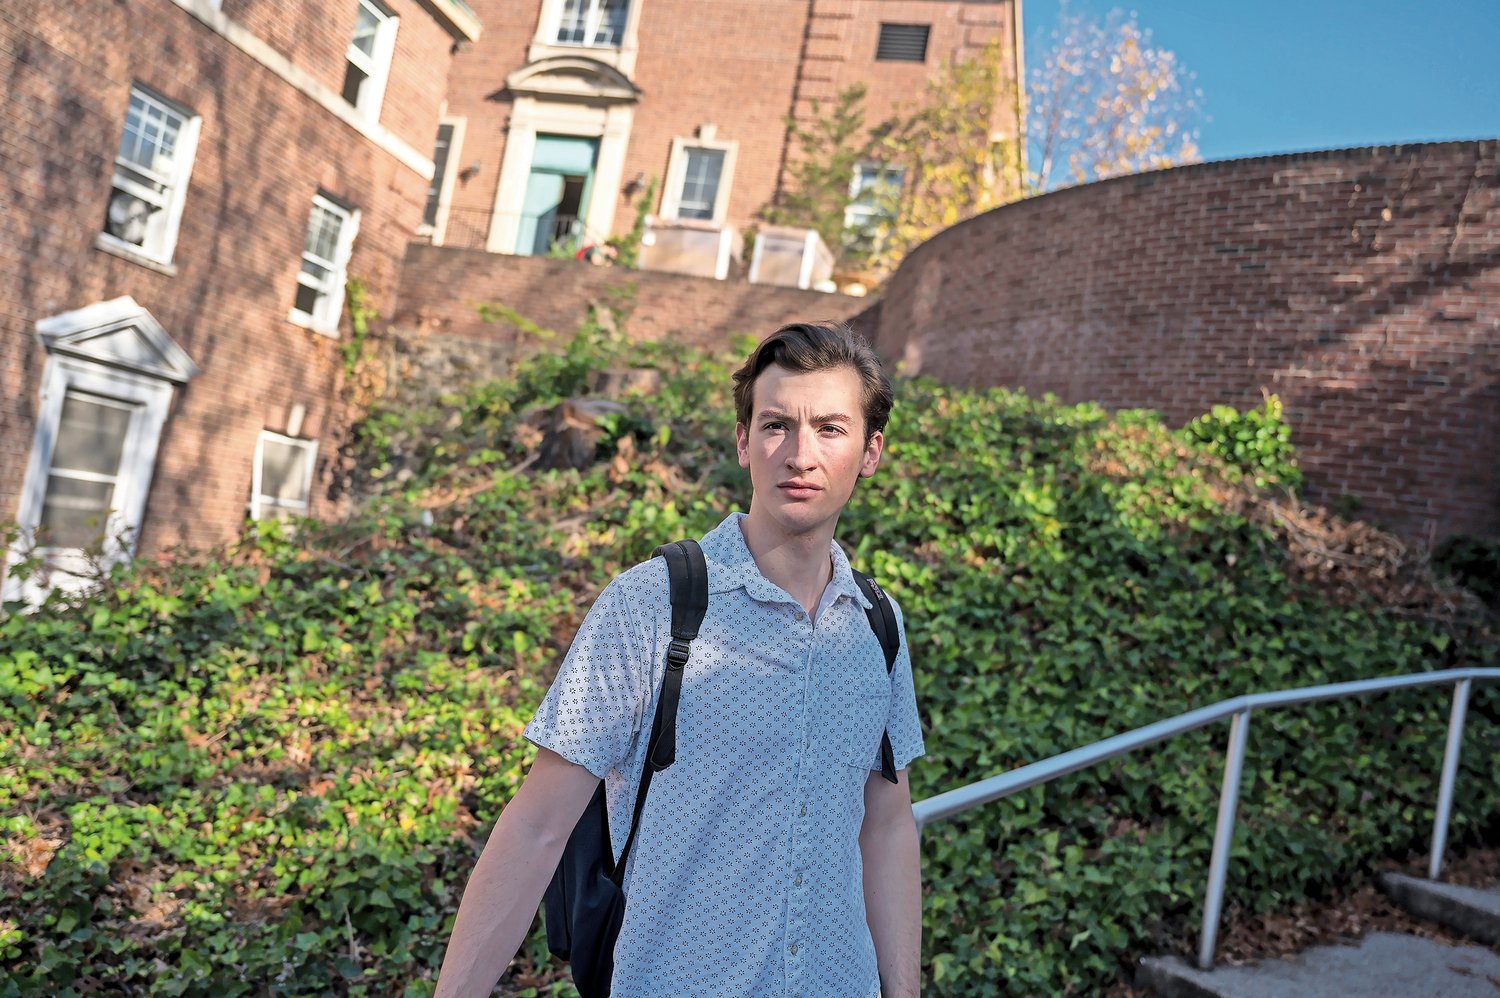 Michael Falco, a senior at Manhattan College, is inspired by the works of "The Strain" co-author Chuck Hogan, who spoke recently at the school.